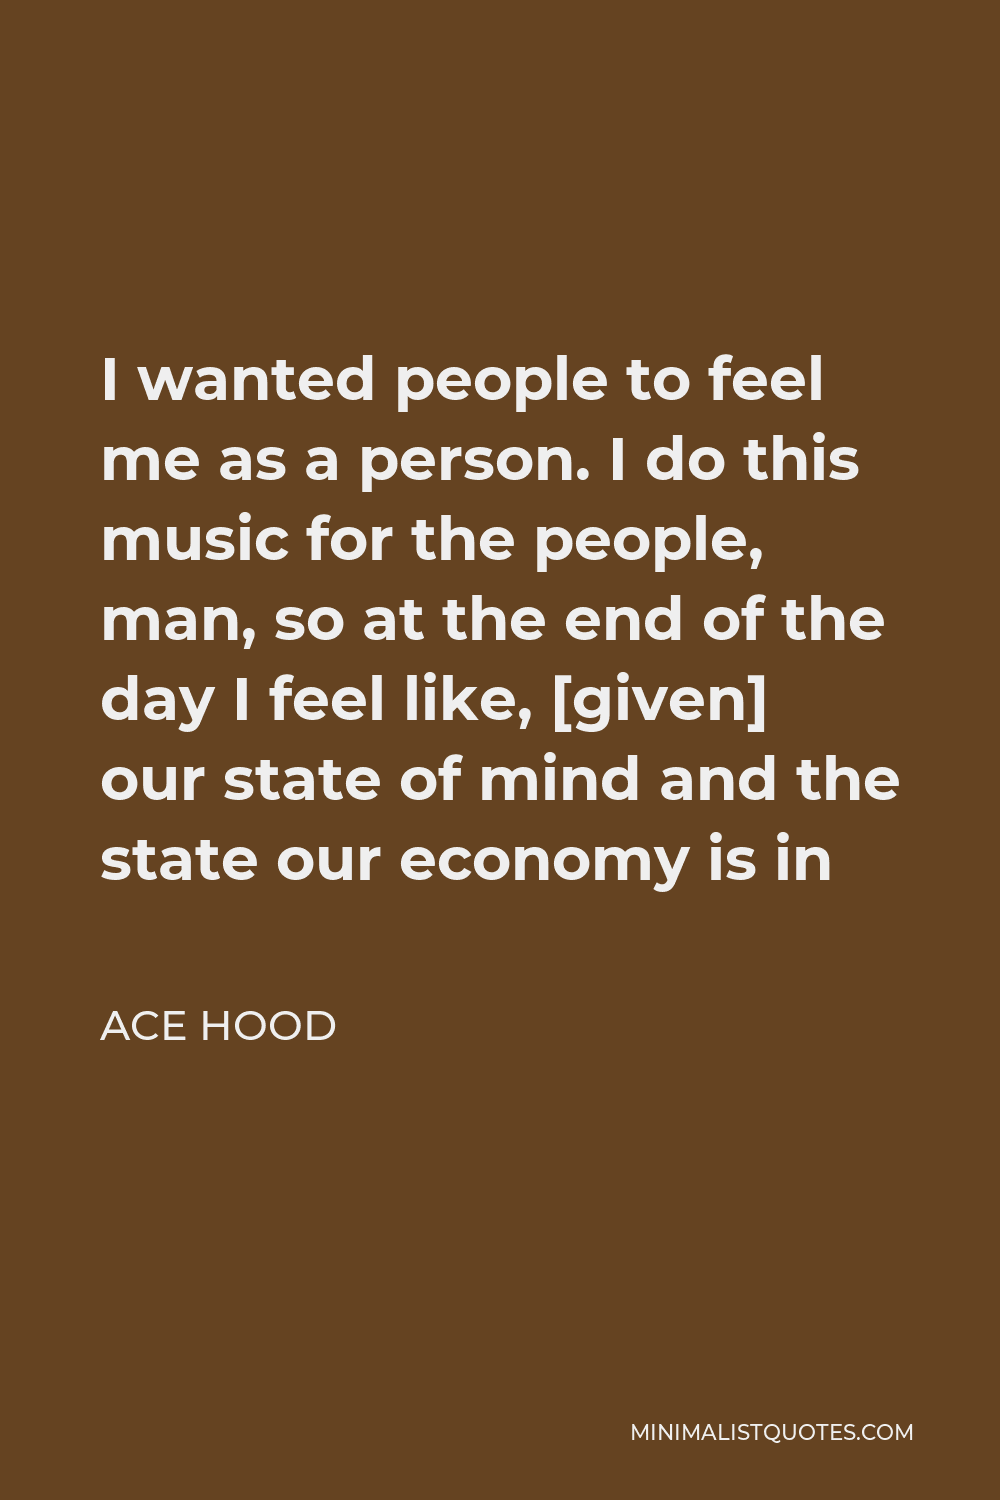 Ace Hood Quote - I wanted people to feel me as a person. I do this music for the people, man, so at the end of the day I feel like, [given] our state of mind and the state our economy is in